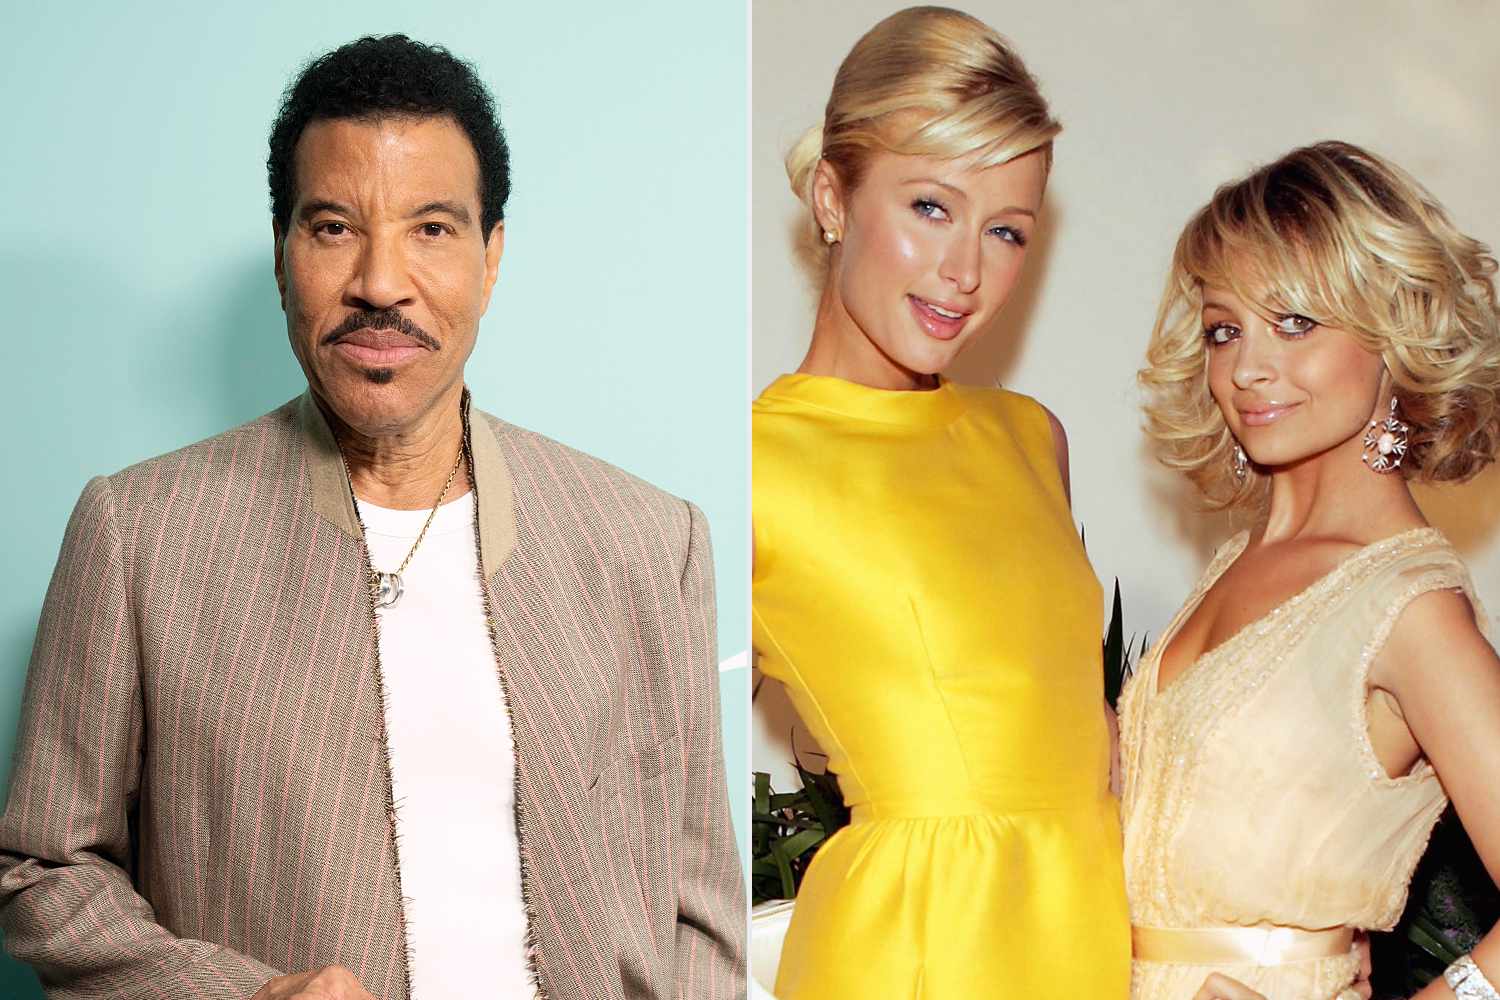 Lionel Richie jokes daughter Nicole and Paris Hilton 'haven't changed,' new reality show 'scares' him